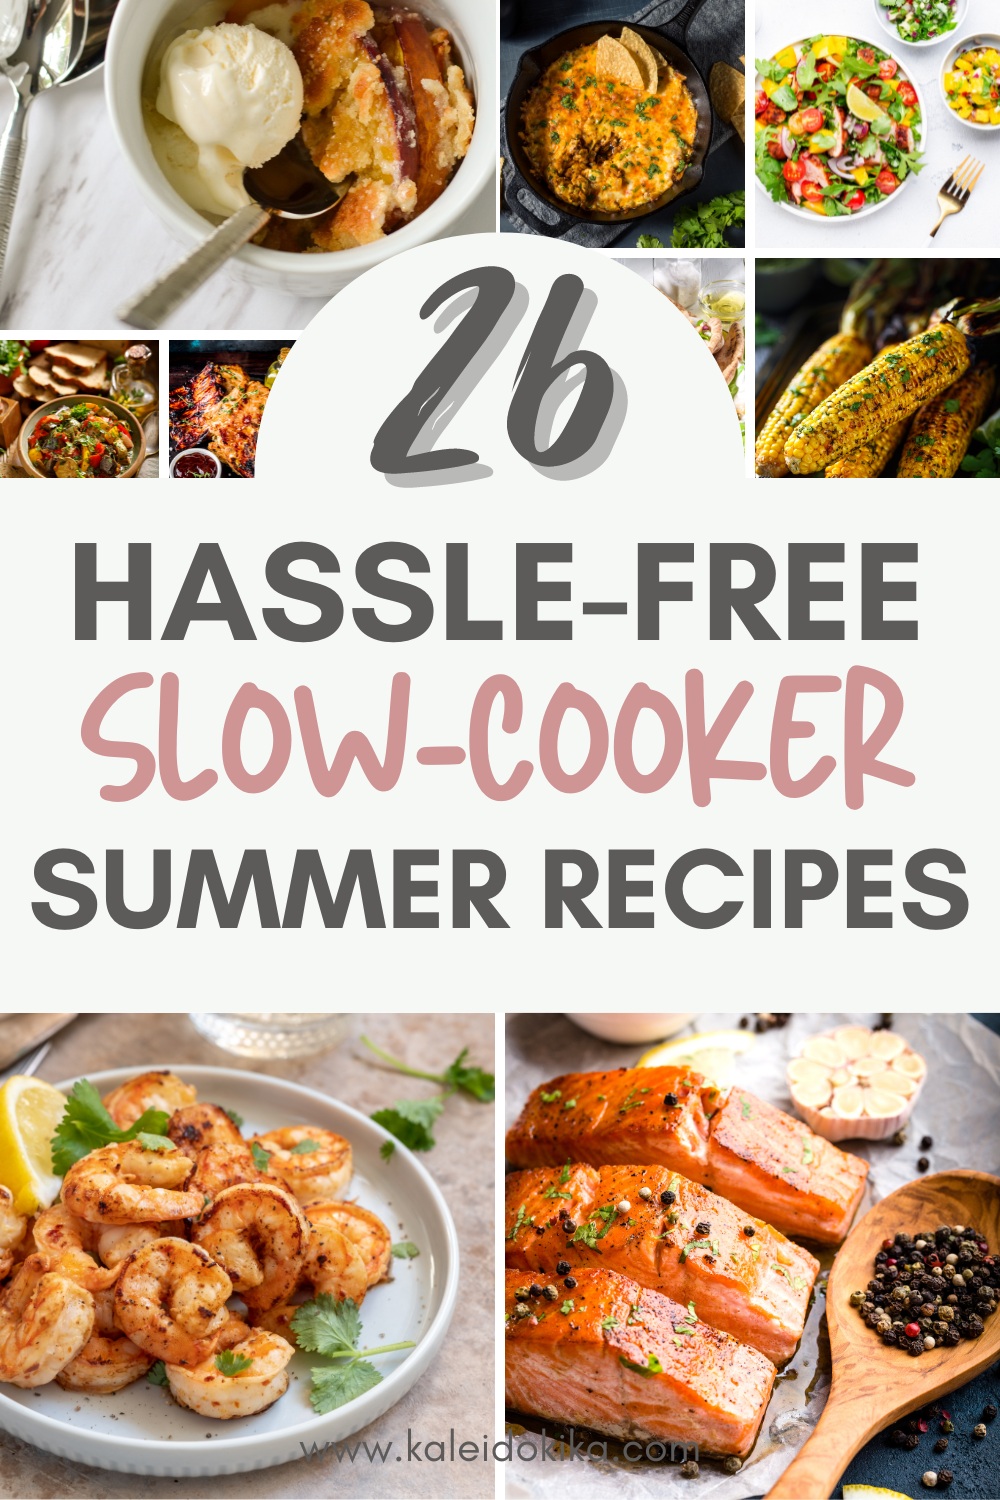 Image showing 26 delicious summer crockpot recipes